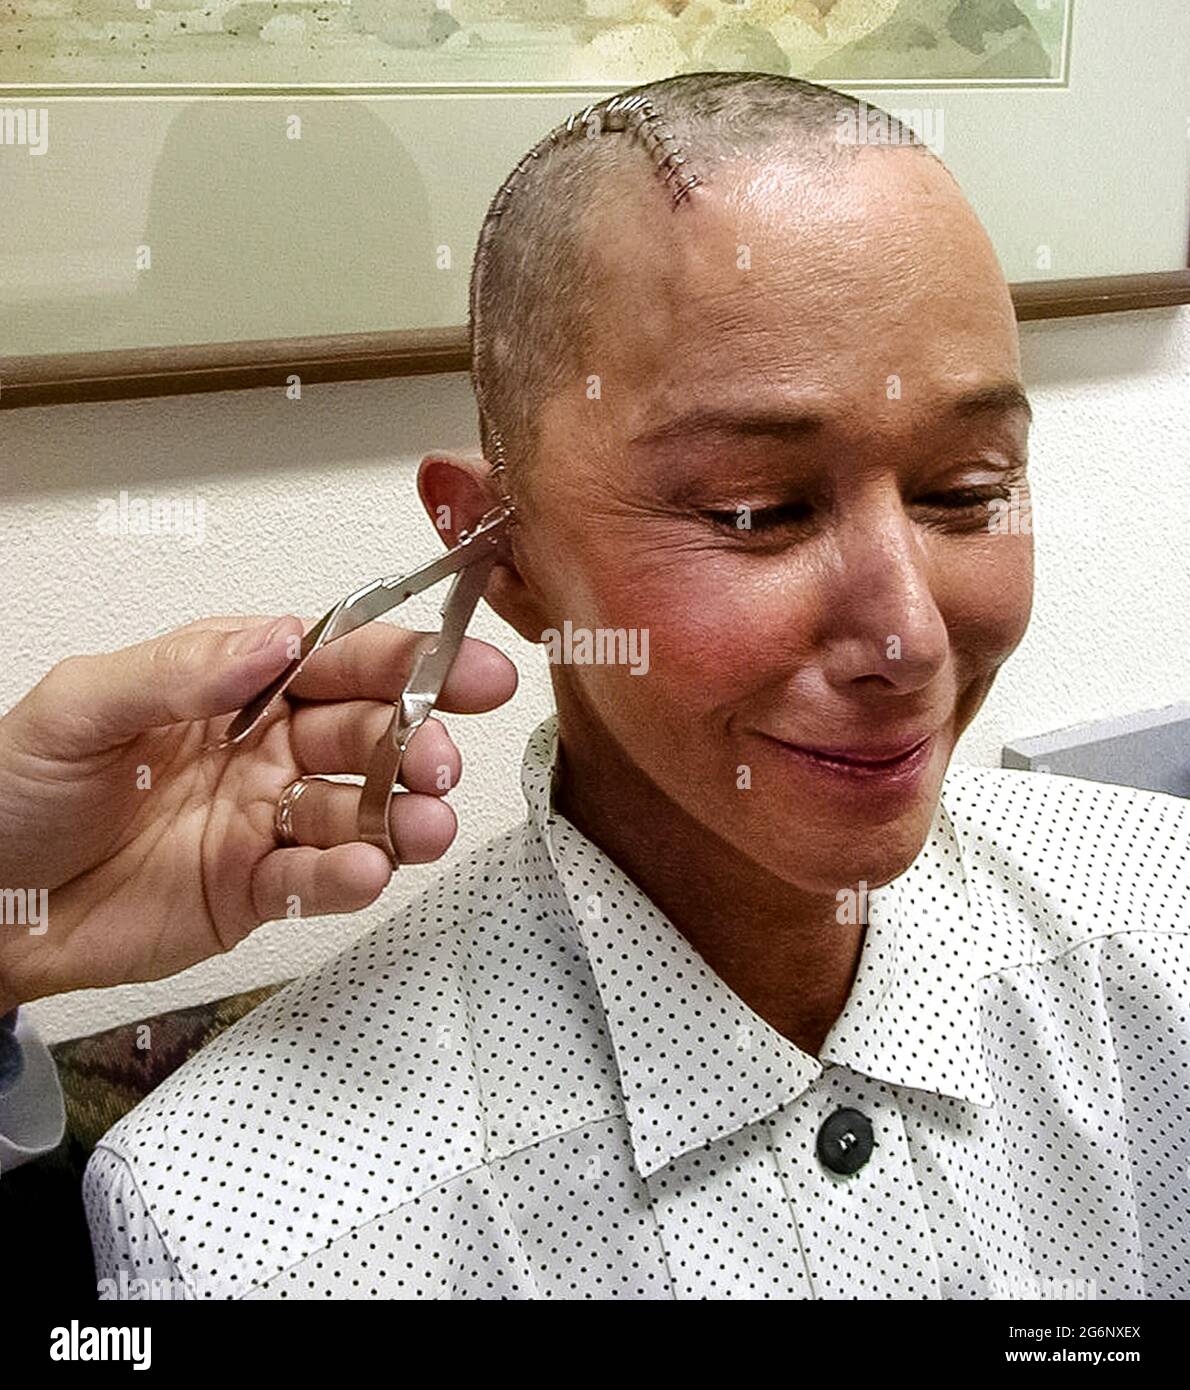 An American woman who suffered from epilepsy smiles as her hair grows back and a doctor removes the stainless steel staples that were used to close a large incision in her head after an operation on her brain. Her hair was shaved off before the surgeon cut into her scalp and skull (cranium) to perform a temporal lobectomy, a surgery that can lower the number of seizures, make them less severe, or even stop them from happening. During this medical procedure, the doctor removed some of the temporal lobe of her brain where most seizures start. (5th of 7 related images.) Model released. Stock Photo